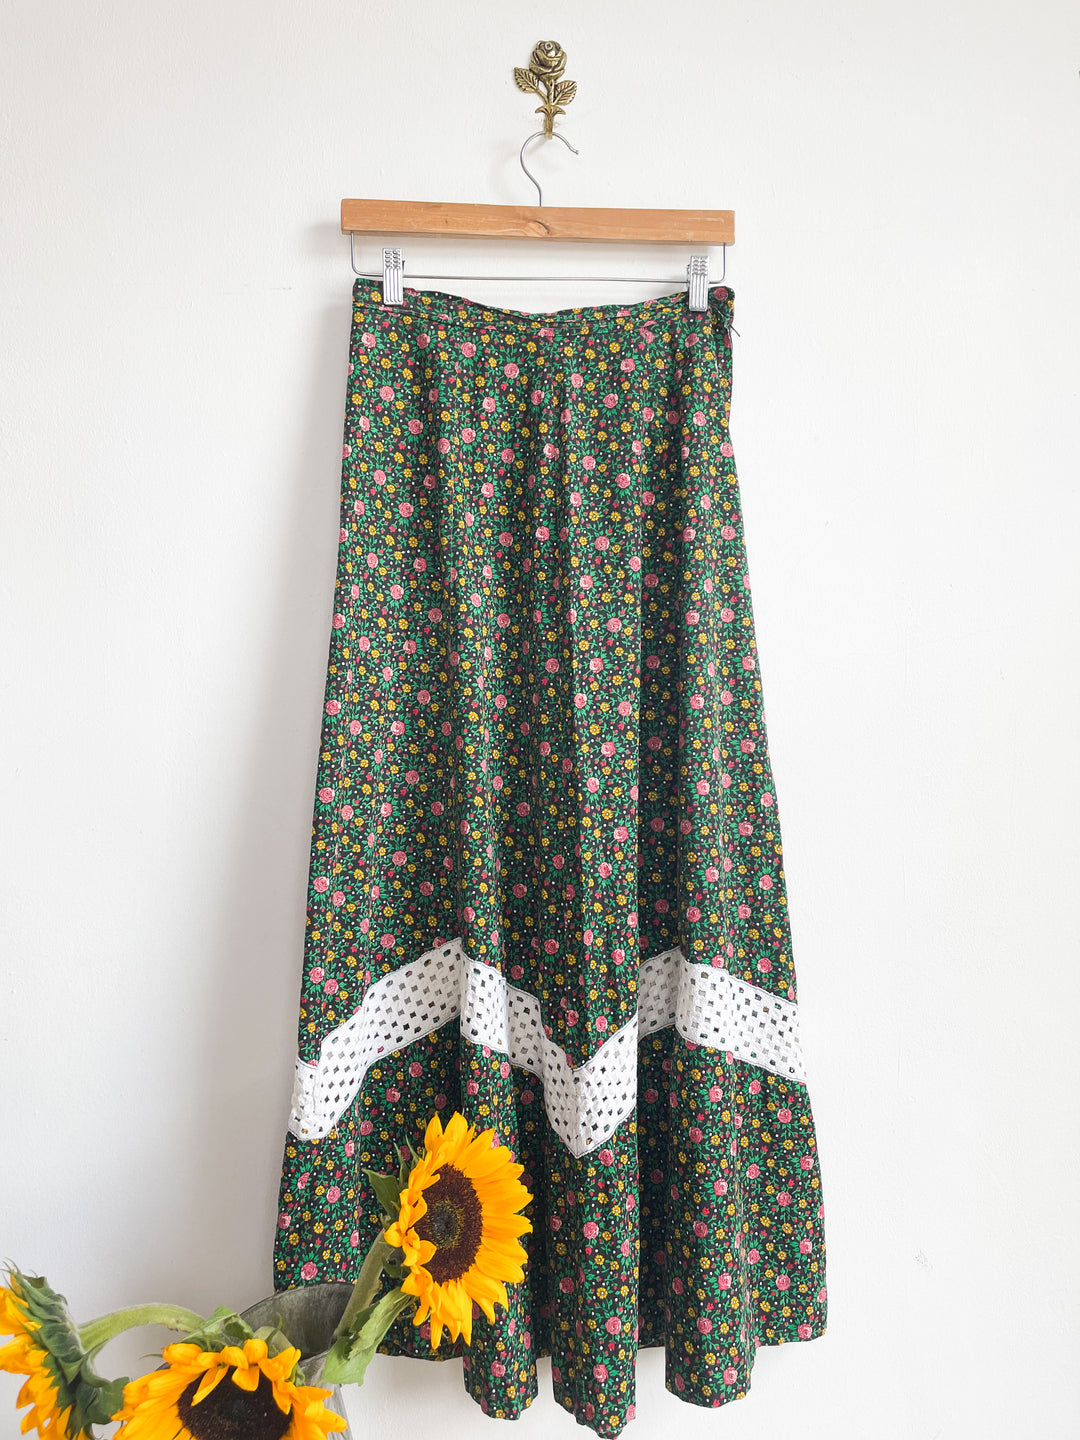 The Dianthus 70s skirt